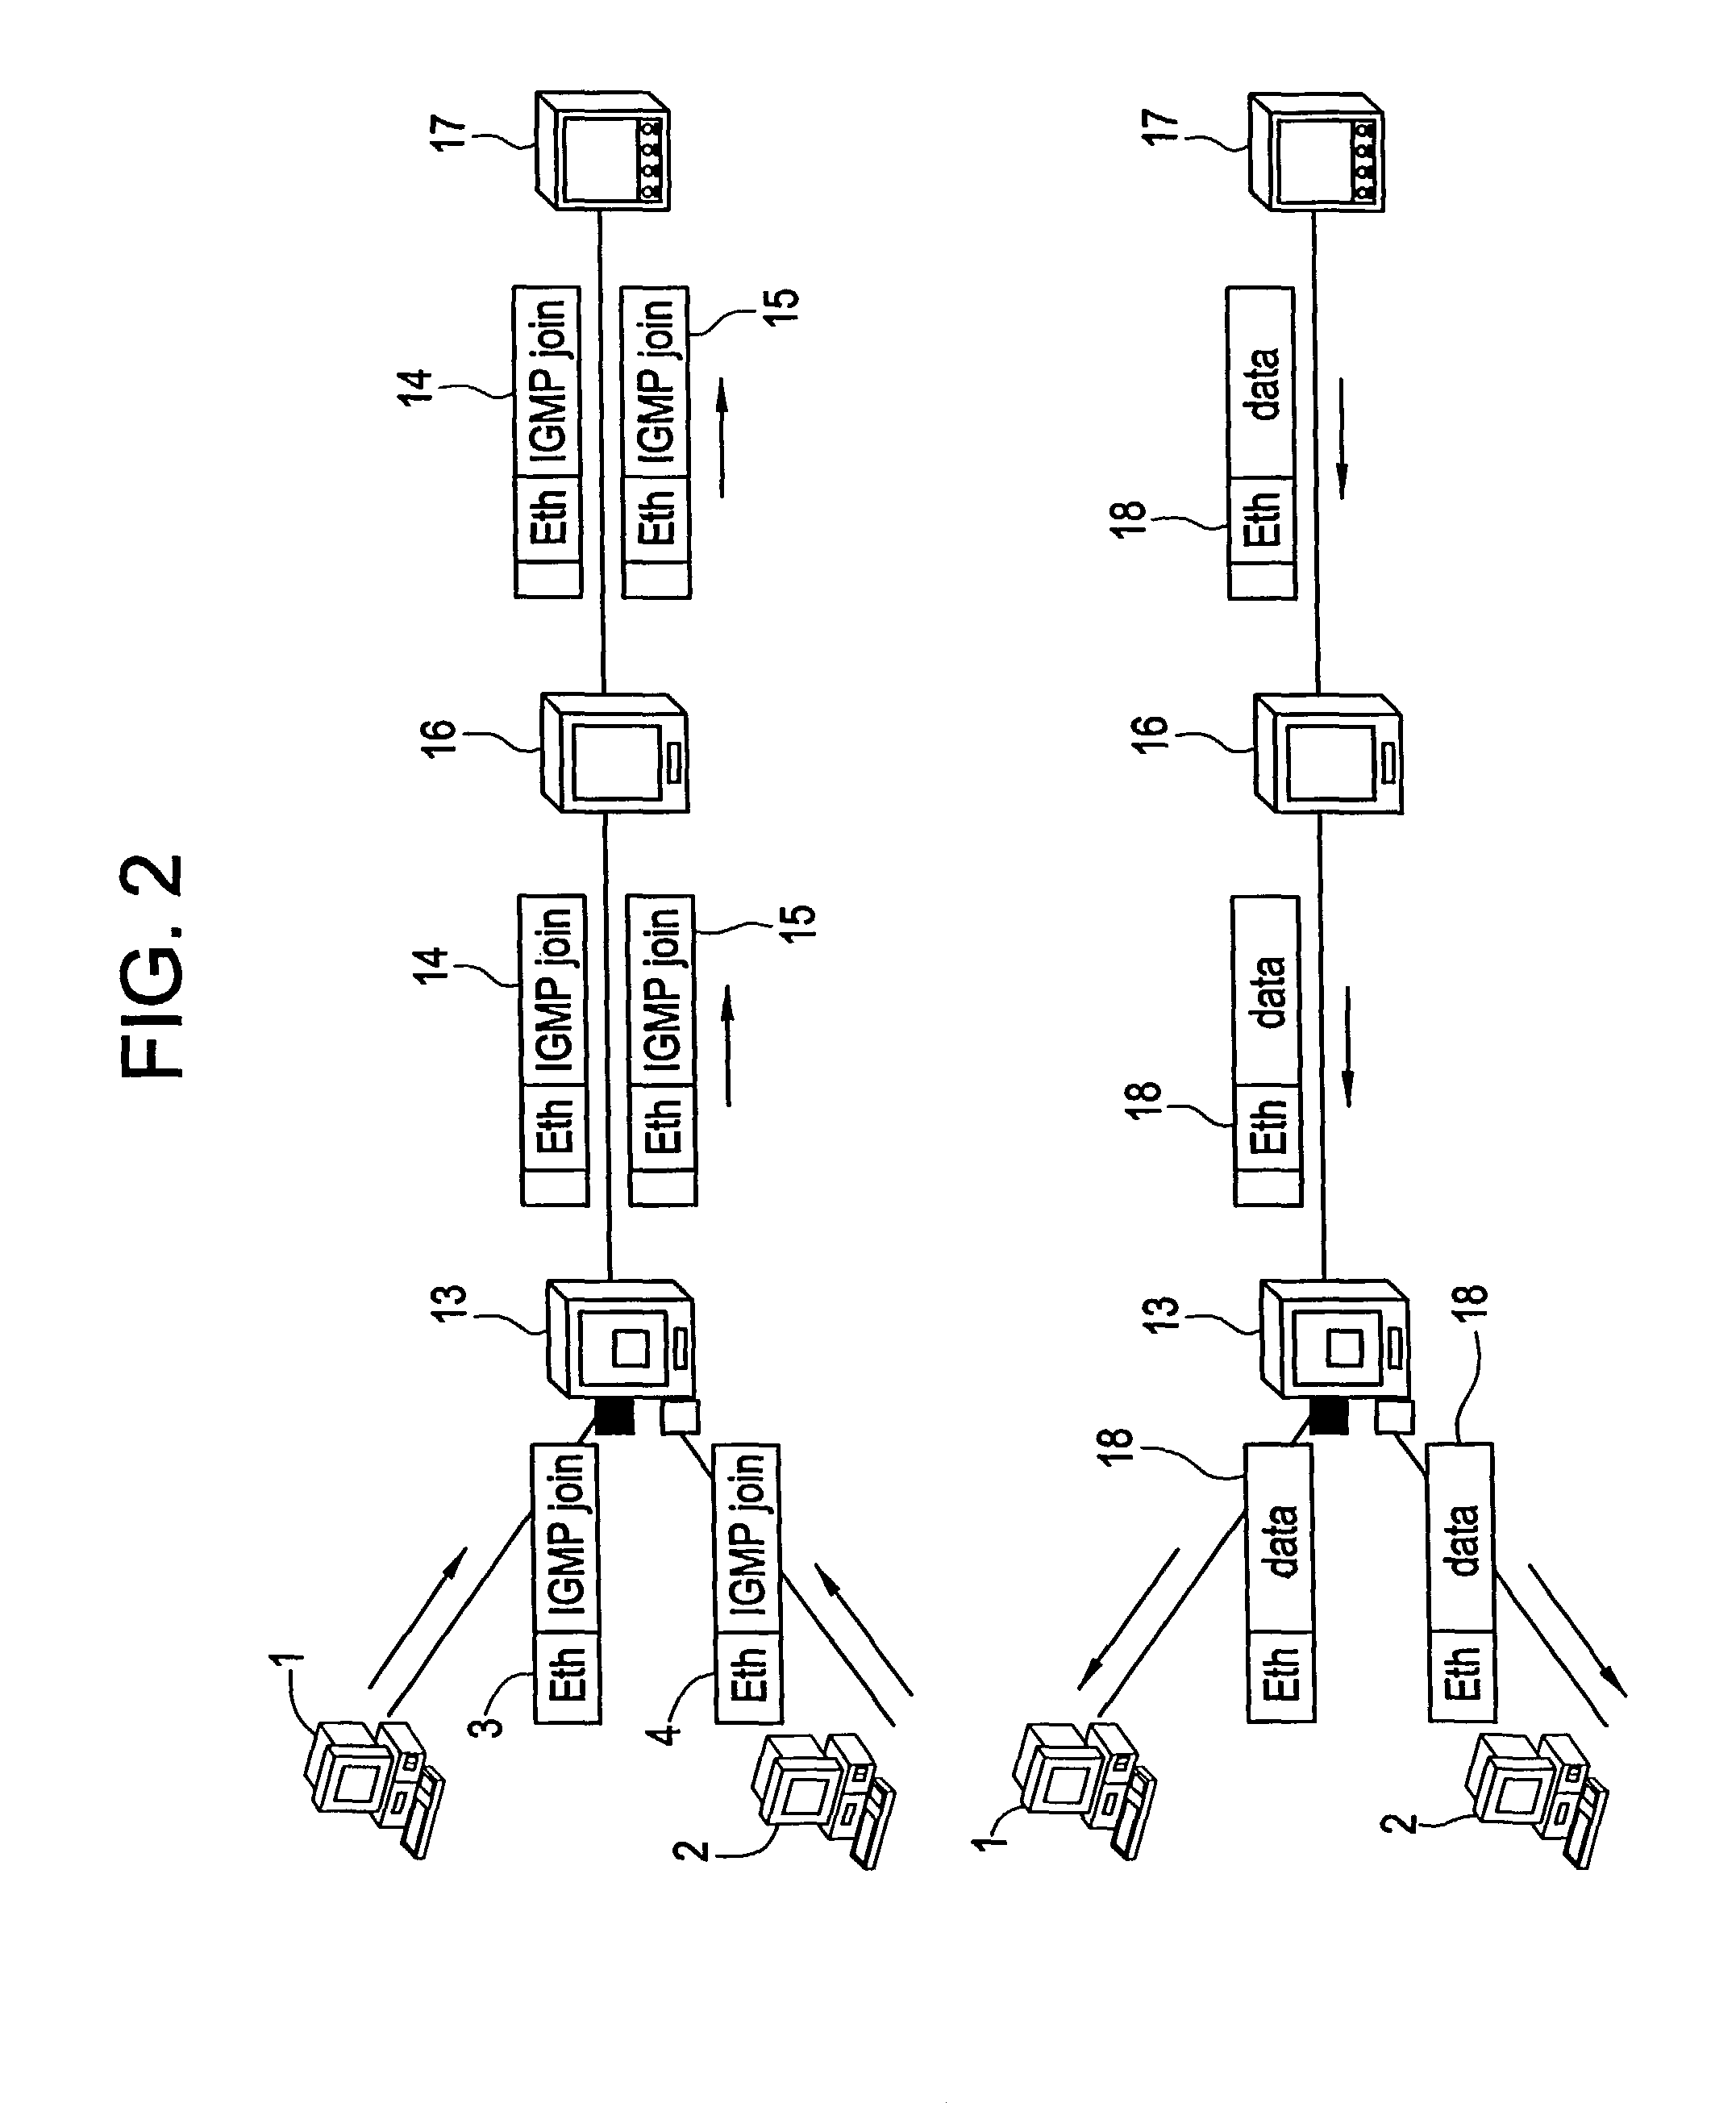 Method and apparatus of directing multicast traffic in an Ethernet MAN